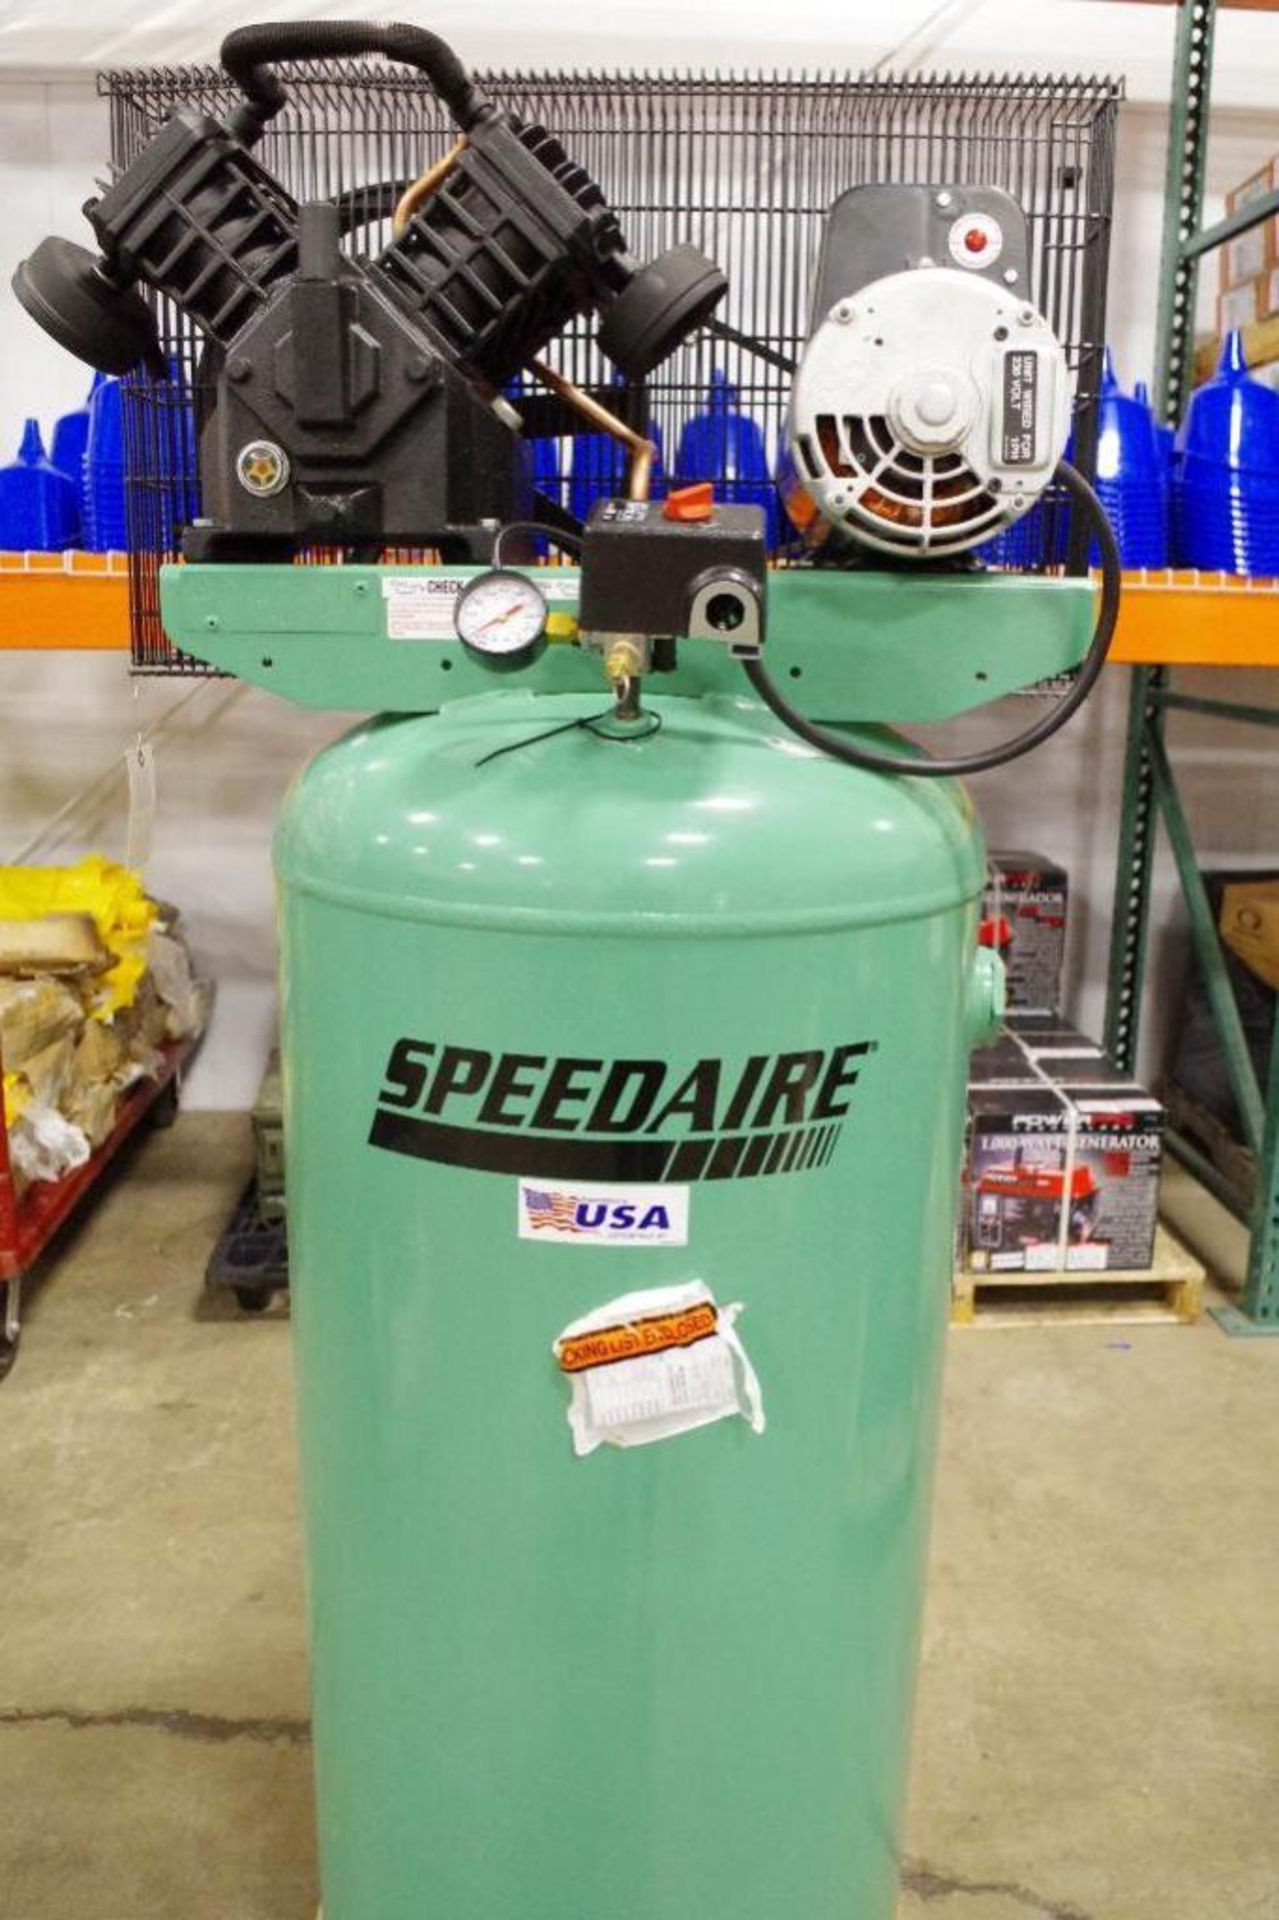 SPEEDAIRE 60 Gal. Vertical Tank Mounted Electric Air Compressor, 1 PH, 5 HP, 140 PSI, M/N 4ME97A - Image 2 of 6